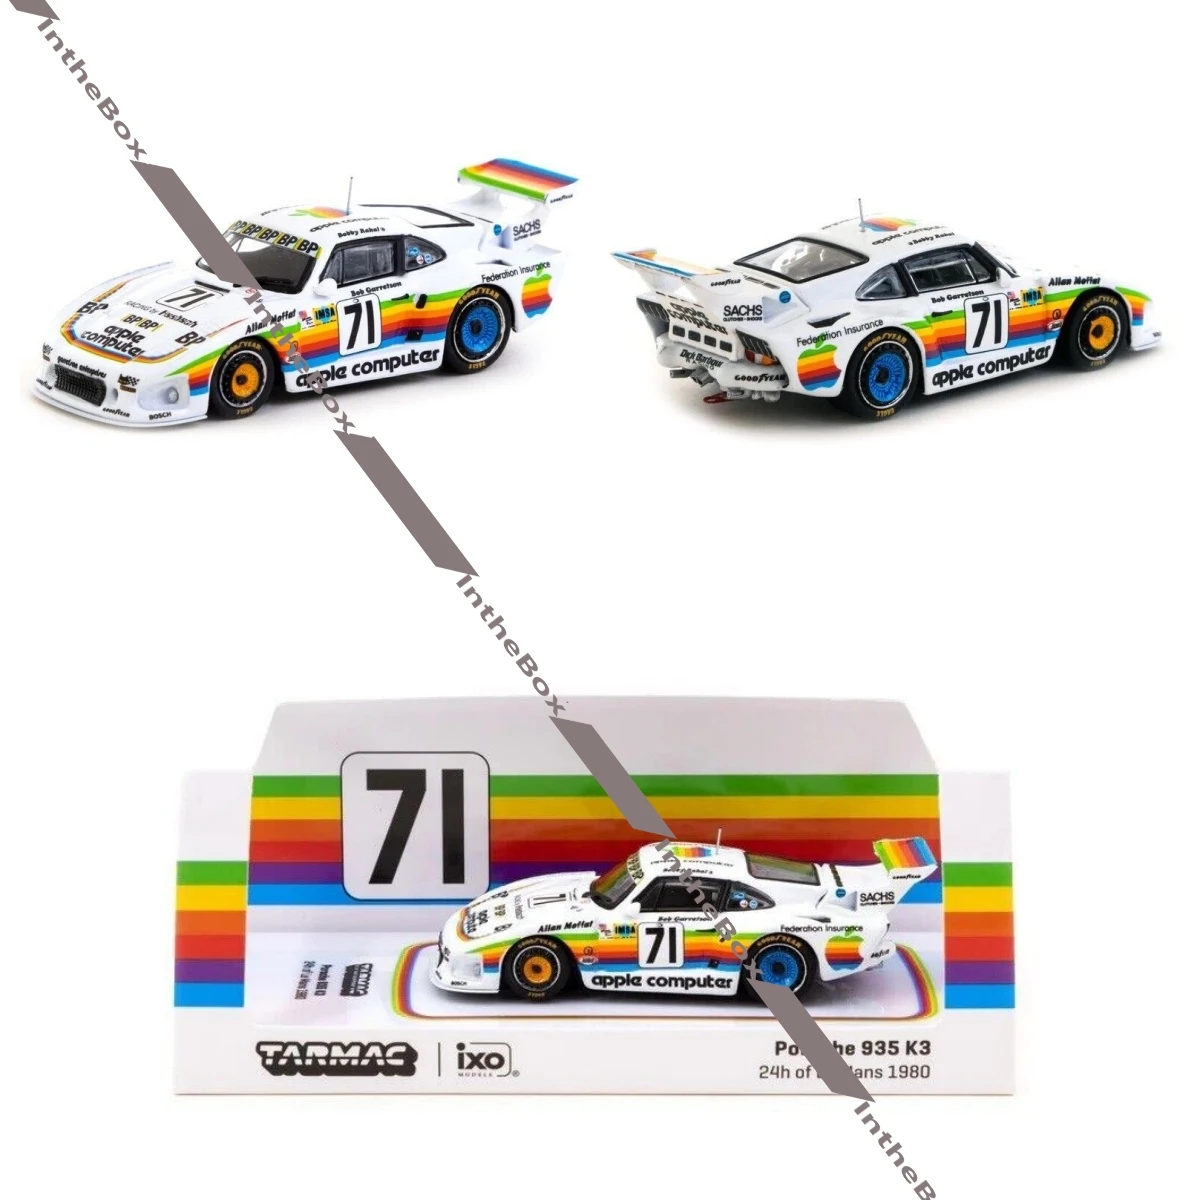 

Tarmac Works X iXO Models 1/64 935 K3 24h of Le Mans 1980 #71 - HOBBY64 Diecast Model car Collection Limited Edition Hobby Toys